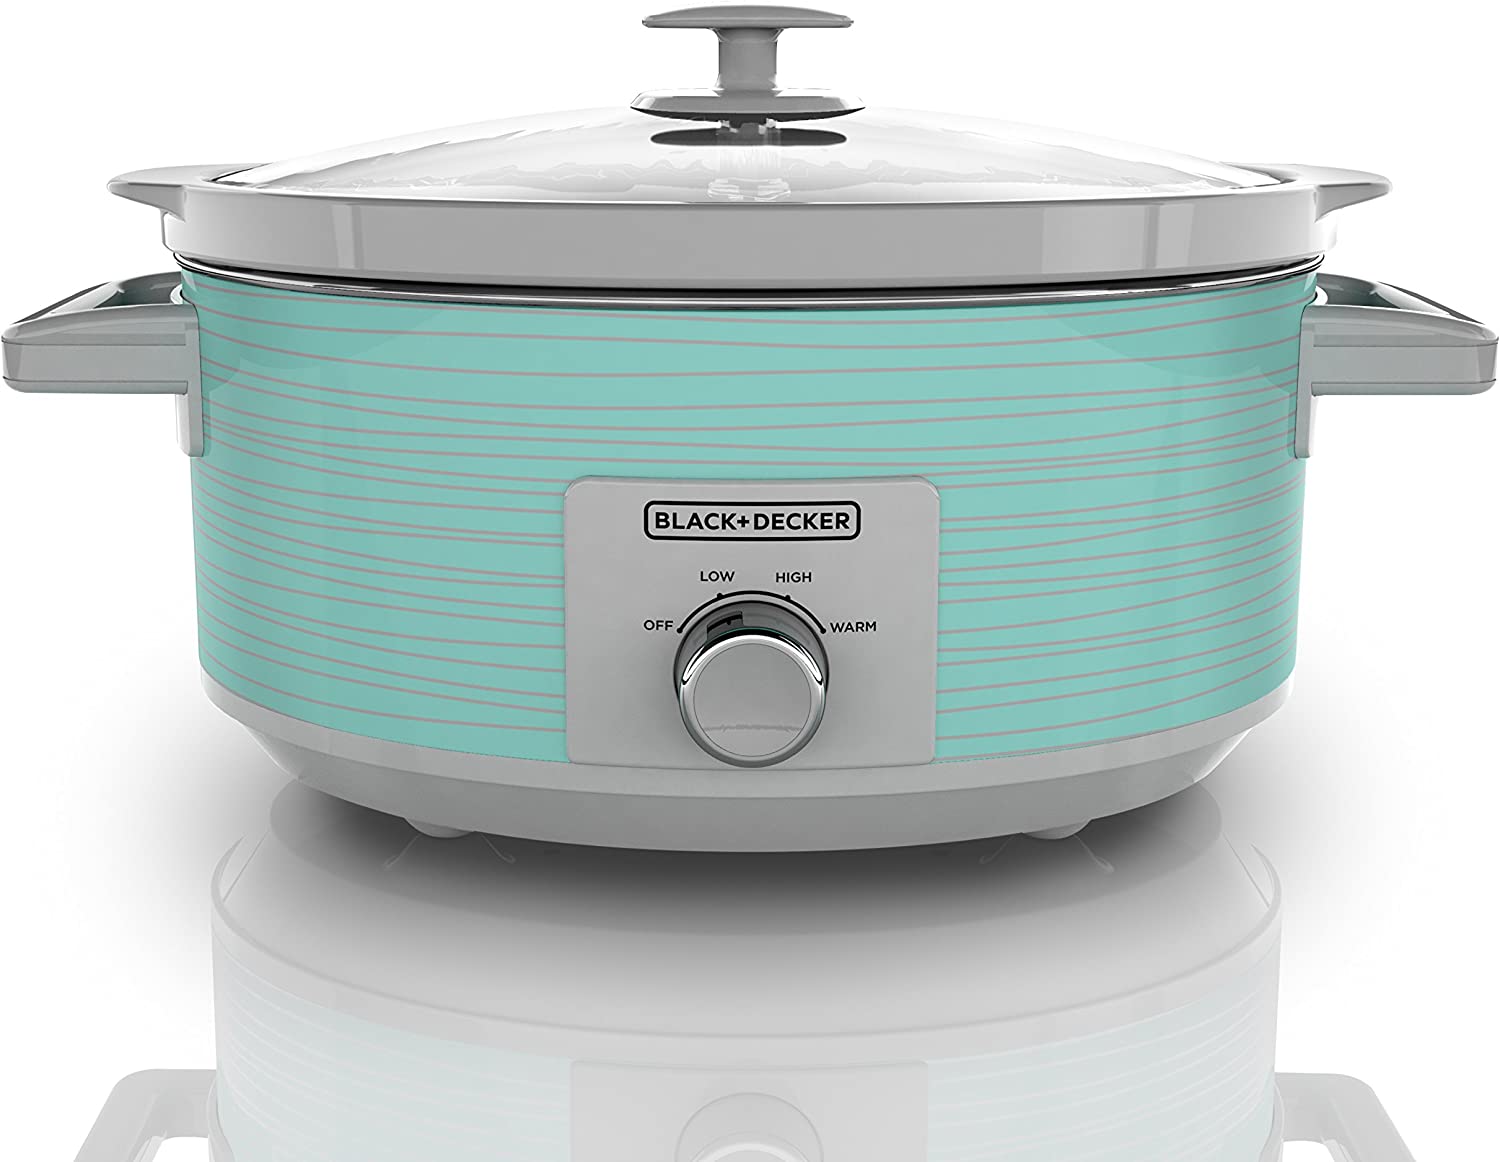 Slow Cooker with Removable Ceramic Pot, 3.5 Litre, Cotton White Cooking  accessories Ollas arroceras eléctricas Food warmers Lar - AliExpress